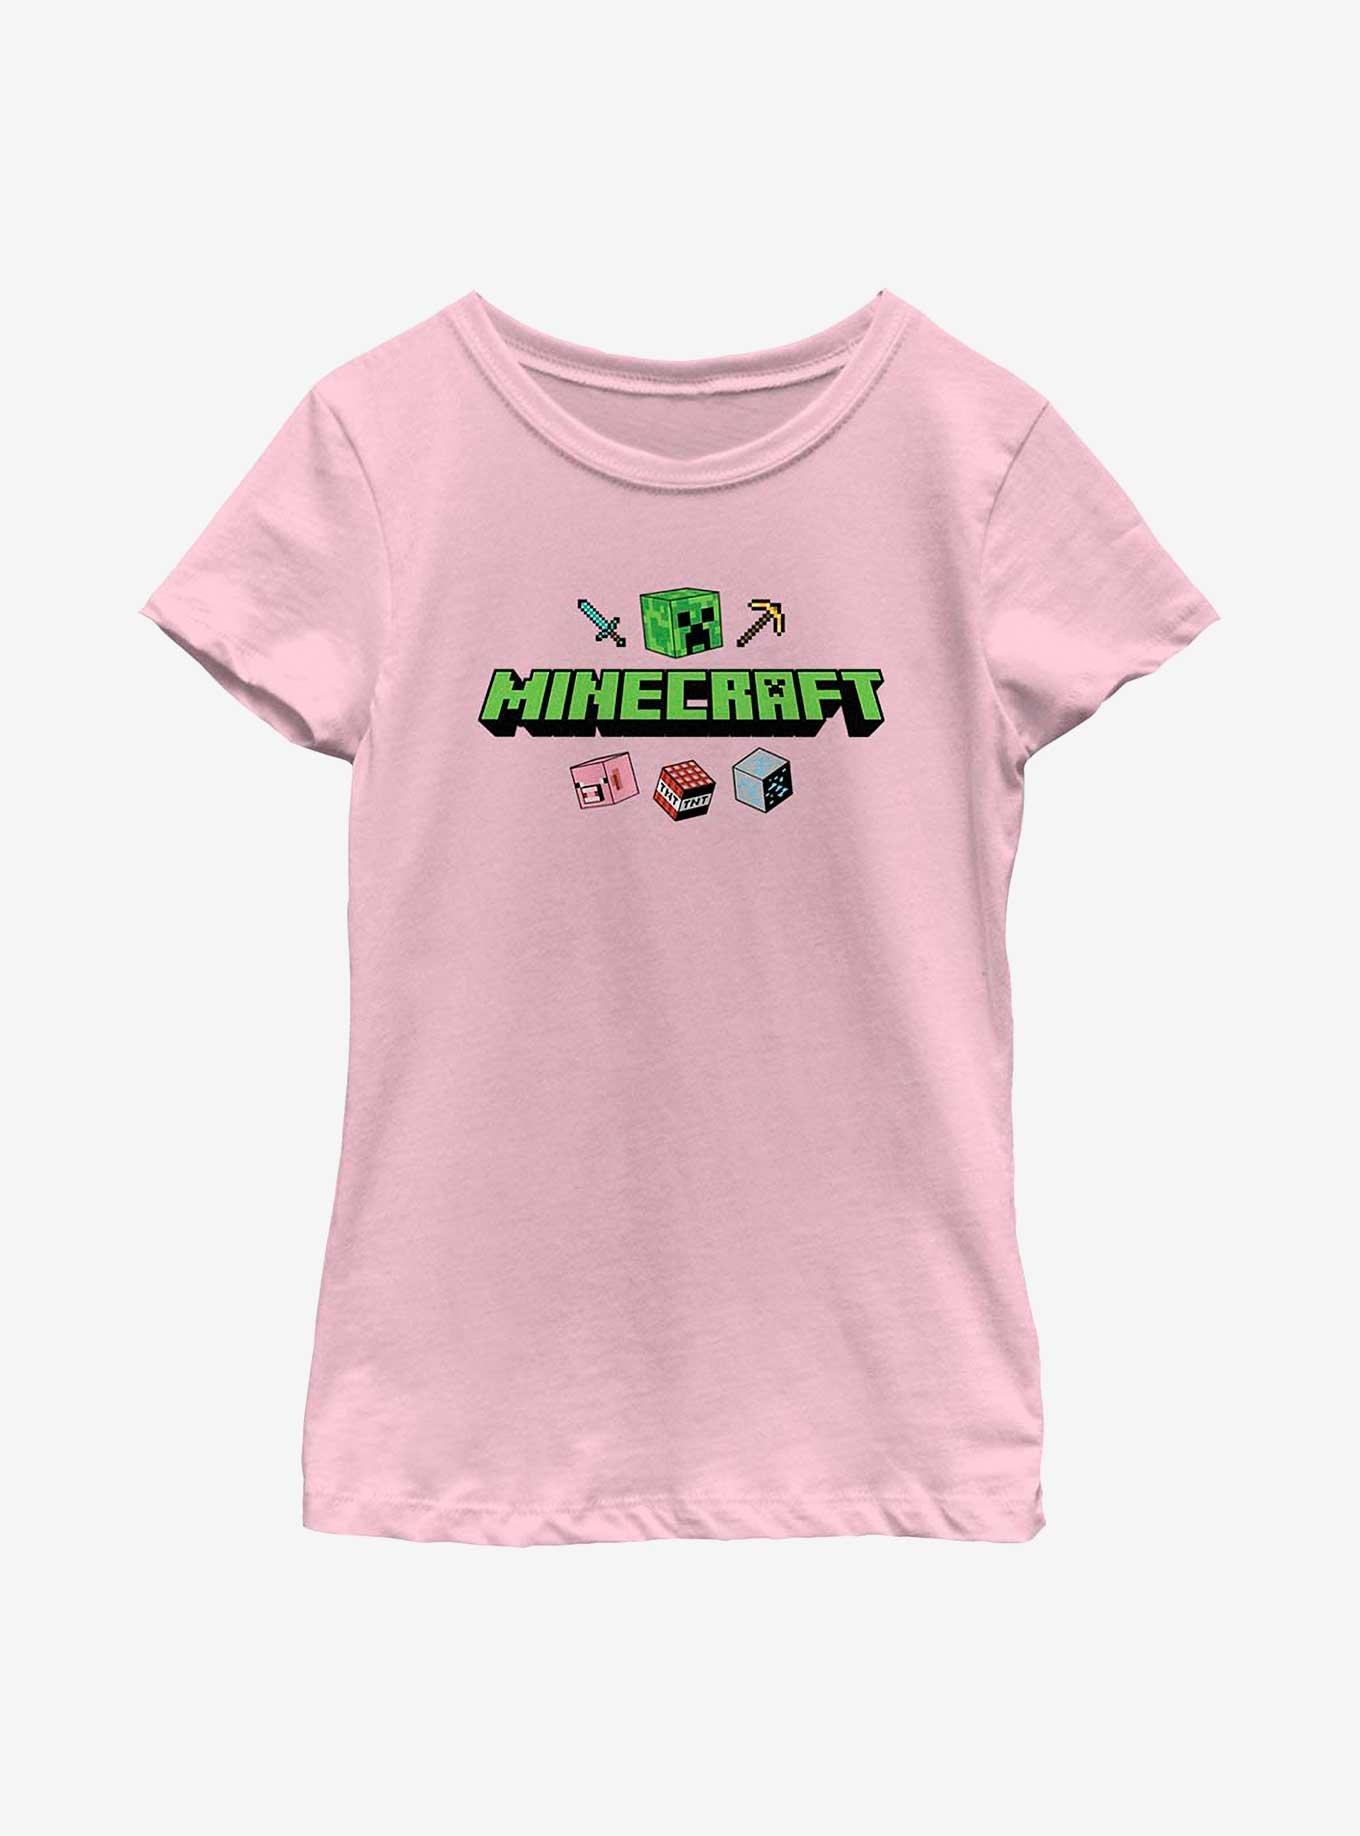 Minecraft Central Youth Girls T-Shirt, PINK, hi-res